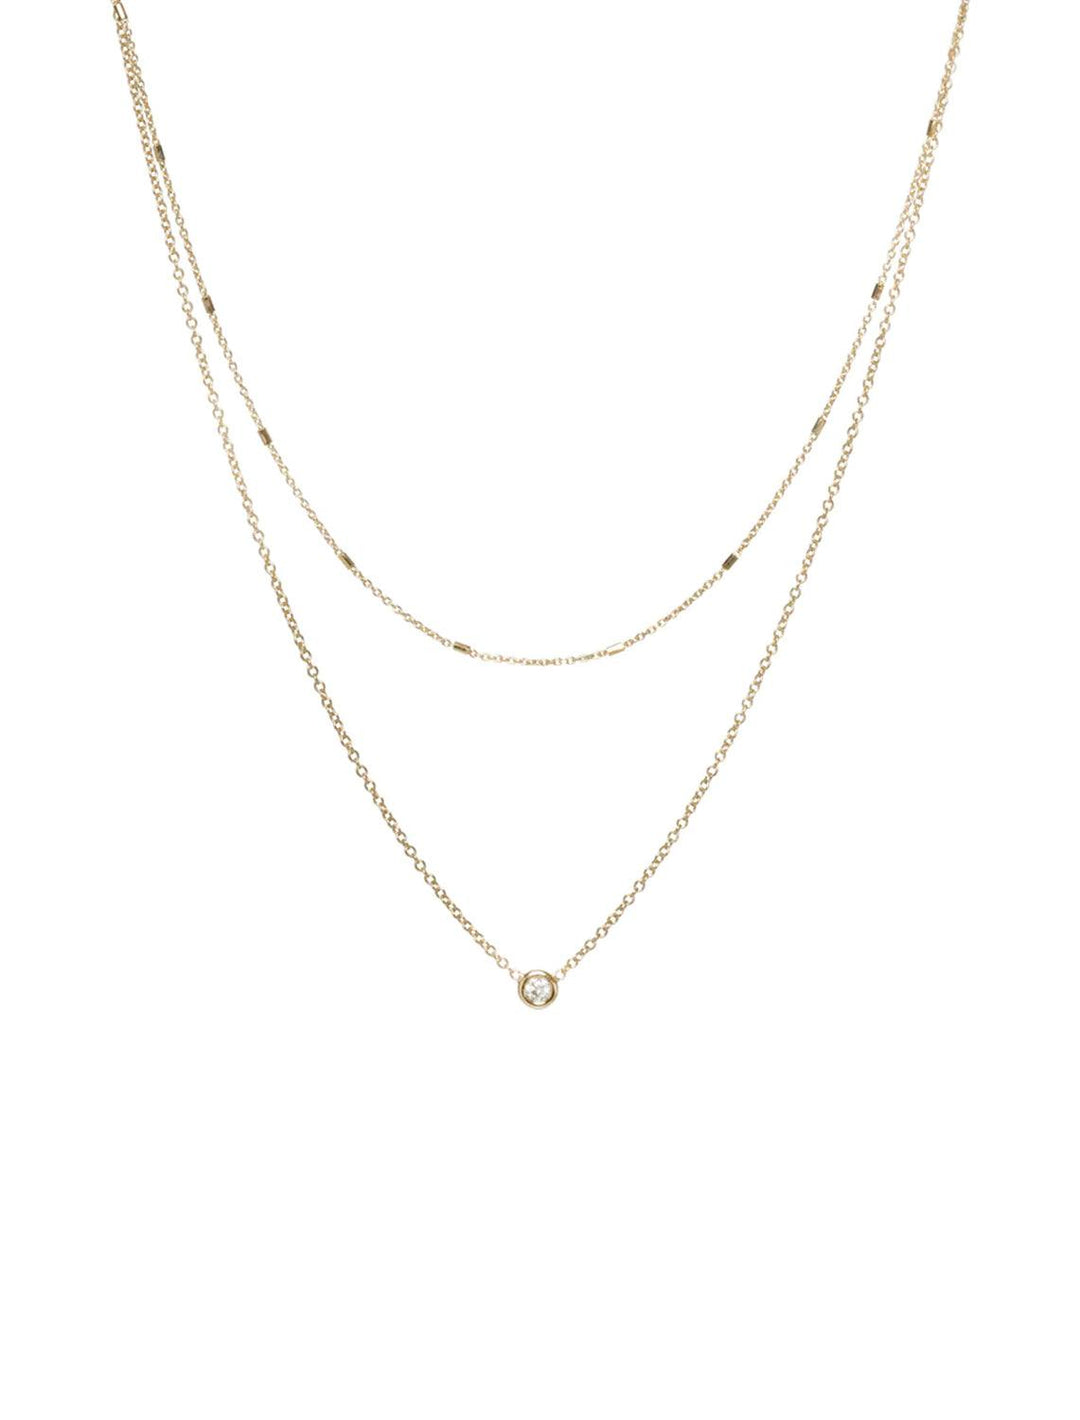 Front view of Zoe Chicco's 14K Tiny Bar Chain and Diamond Pendant Double Chain Necklace in Gold.